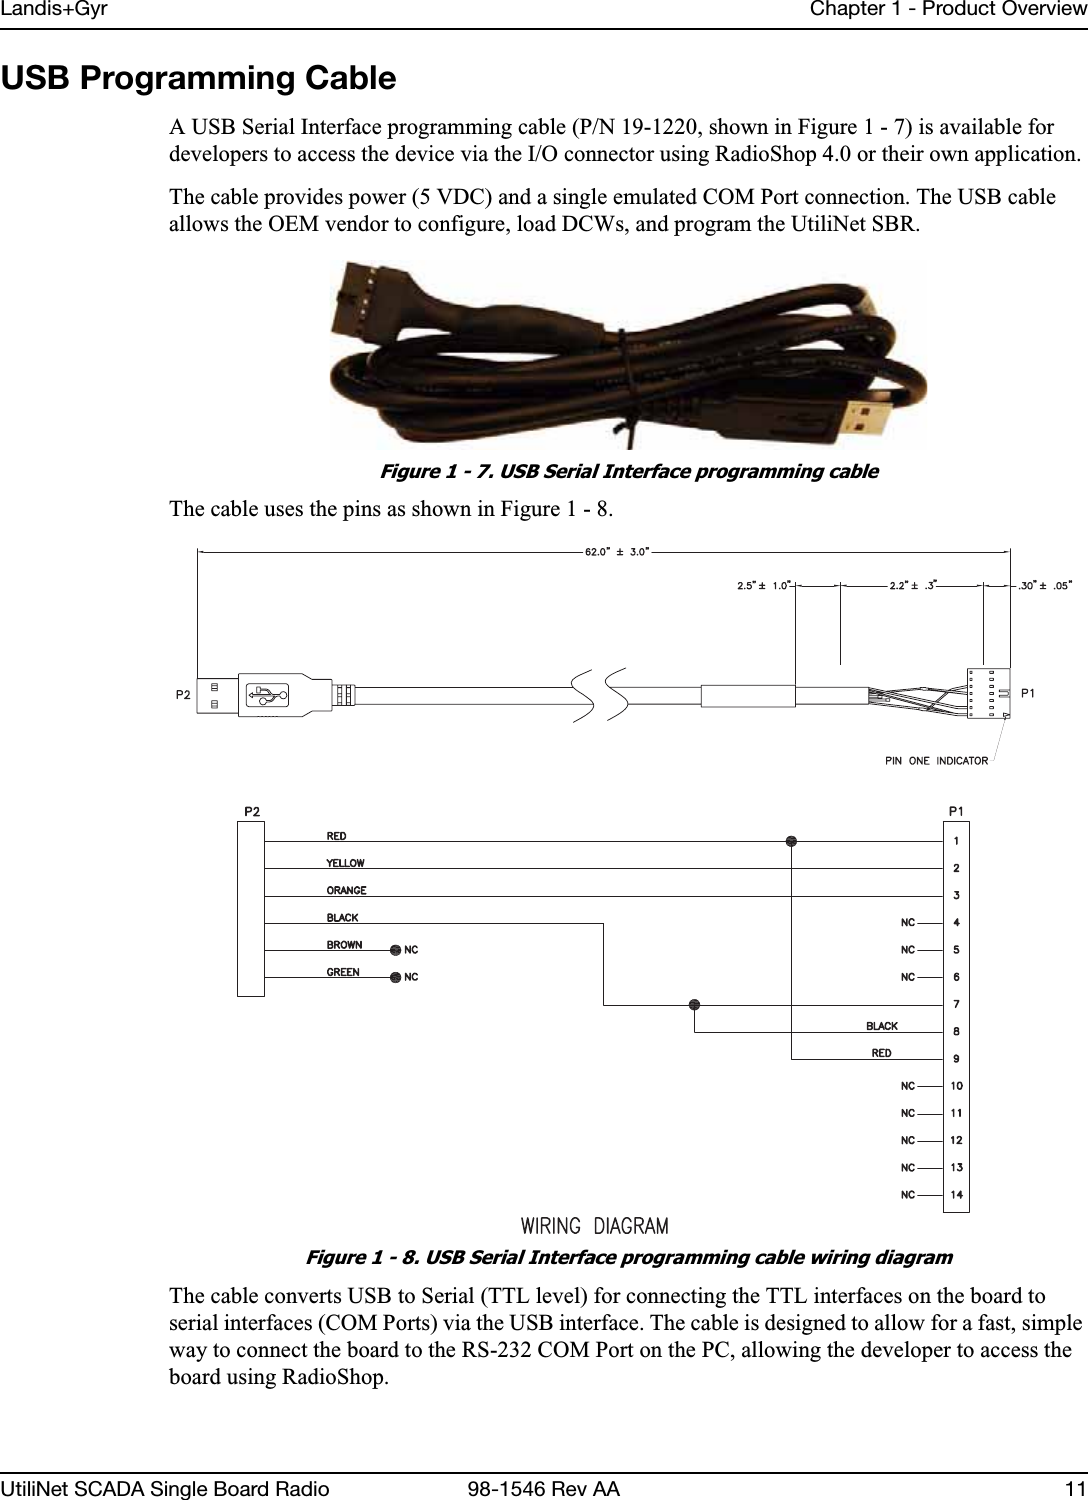 Landis+Gyr Chapter 1 - Product OverviewUtiliNet SCADA Single Board Radio 98-1546 Rev AA 11USB Programming CableA USB Serial Interface programming cable (P/N 19-1220, shown in Figure 1 - 7) is available for developers to access the device via the I/O connector using RadioShop 4.0 or their own application.The cable provides power (5 VDC) and a single emulated COM Port connection. The USB cable allows the OEM vendor to configure, load DCWs, and program the UtiliNet SBR.Figure 1 - 7. USB Serial Interface programming cableThe cable uses the pins as shown in Figure 1 - 8.Figure 1 - 8. USB Serial Interface programming cable wiring diagramThe cable converts USB to Serial (TTL level) for connecting the TTL interfaces on the board to serial interfaces (COM Ports) via the USB interface. The cable is designed to allow for a fast, simple way to connect the board to the RS-232 COM Port on the PC, allowing the developer to access the board using RadioShop.